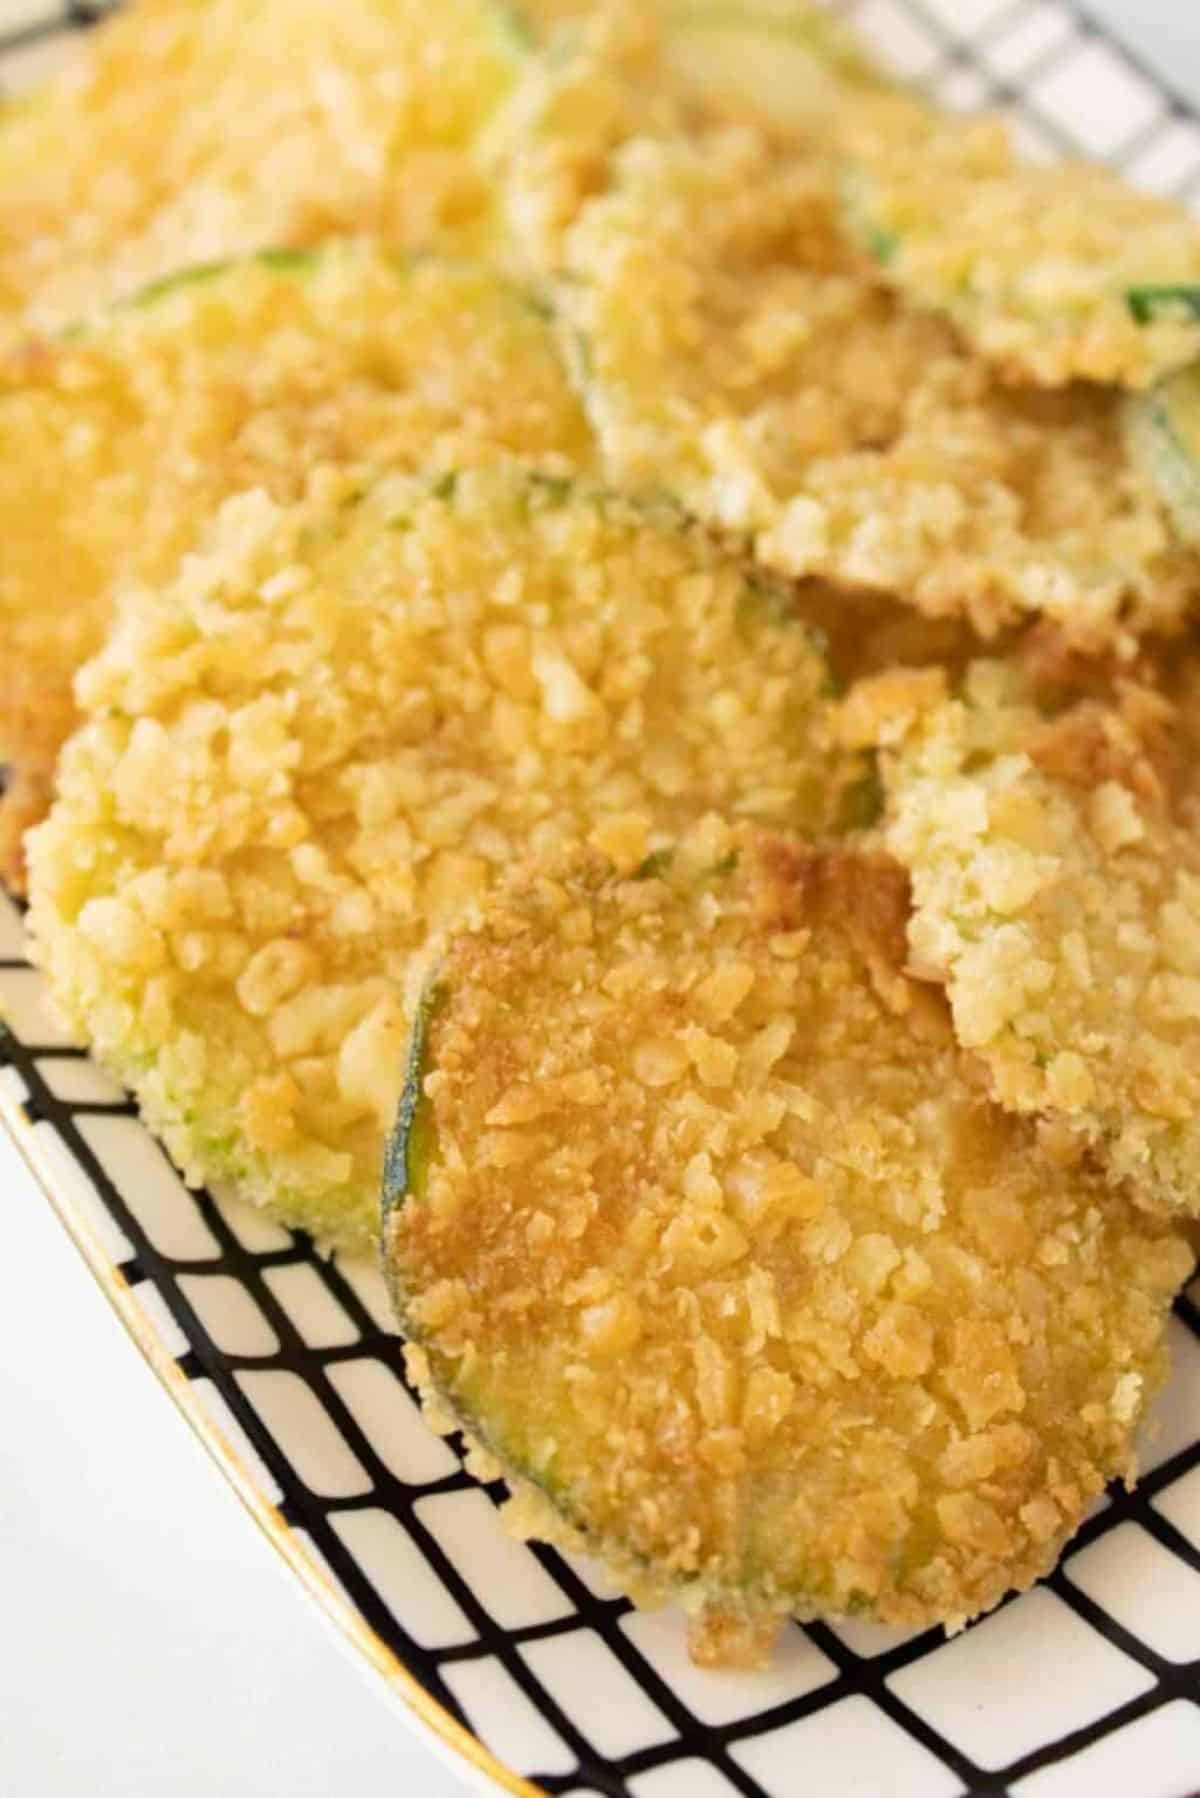 Delicious Fried Zucchini Chips on a tray.